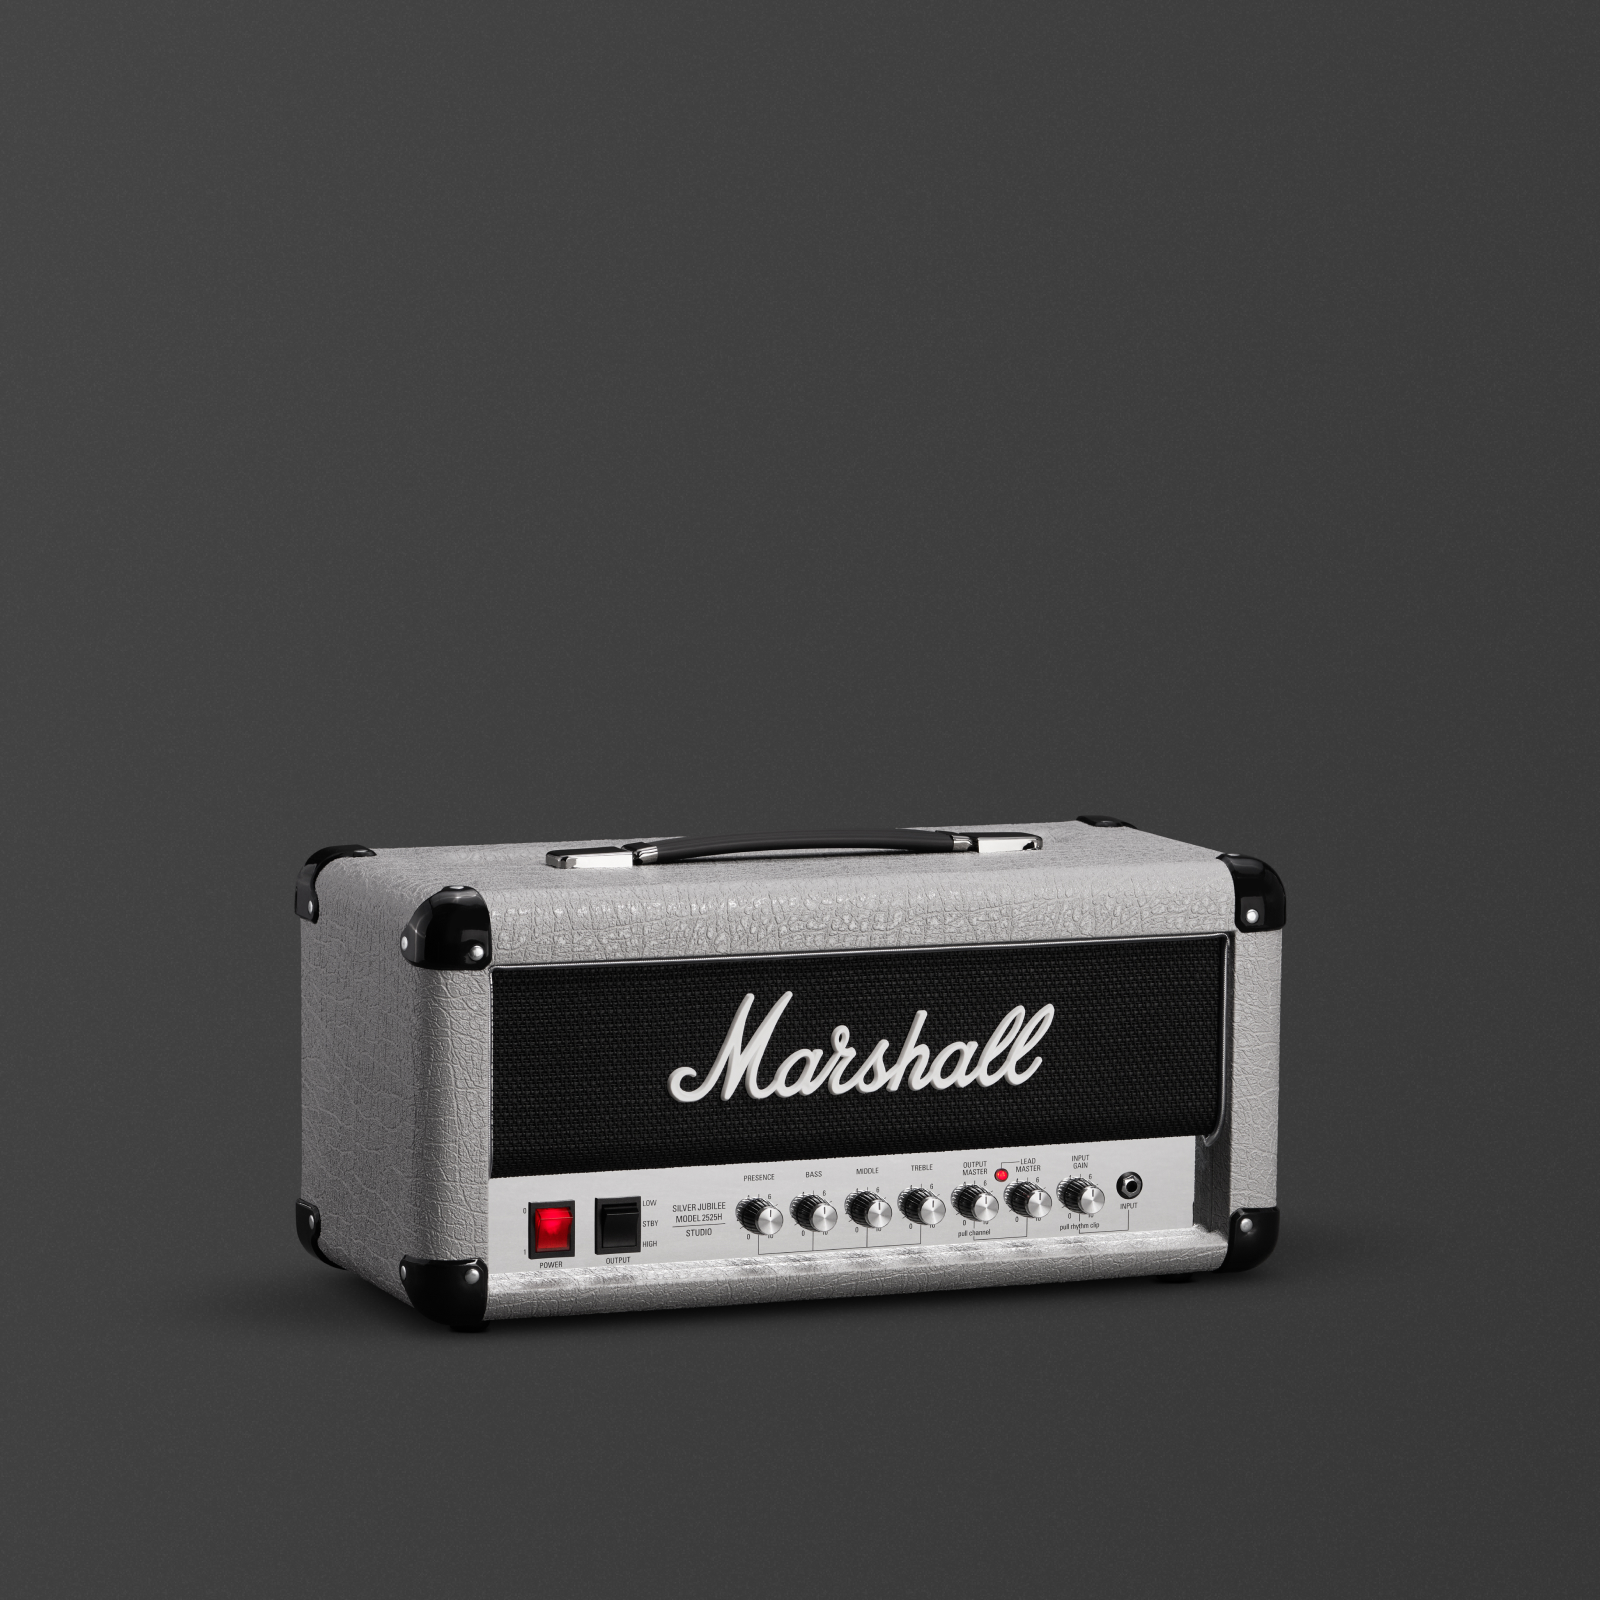 Studio Jubilee amp head delivering cleans, crunch and distortion |  Marshall.com